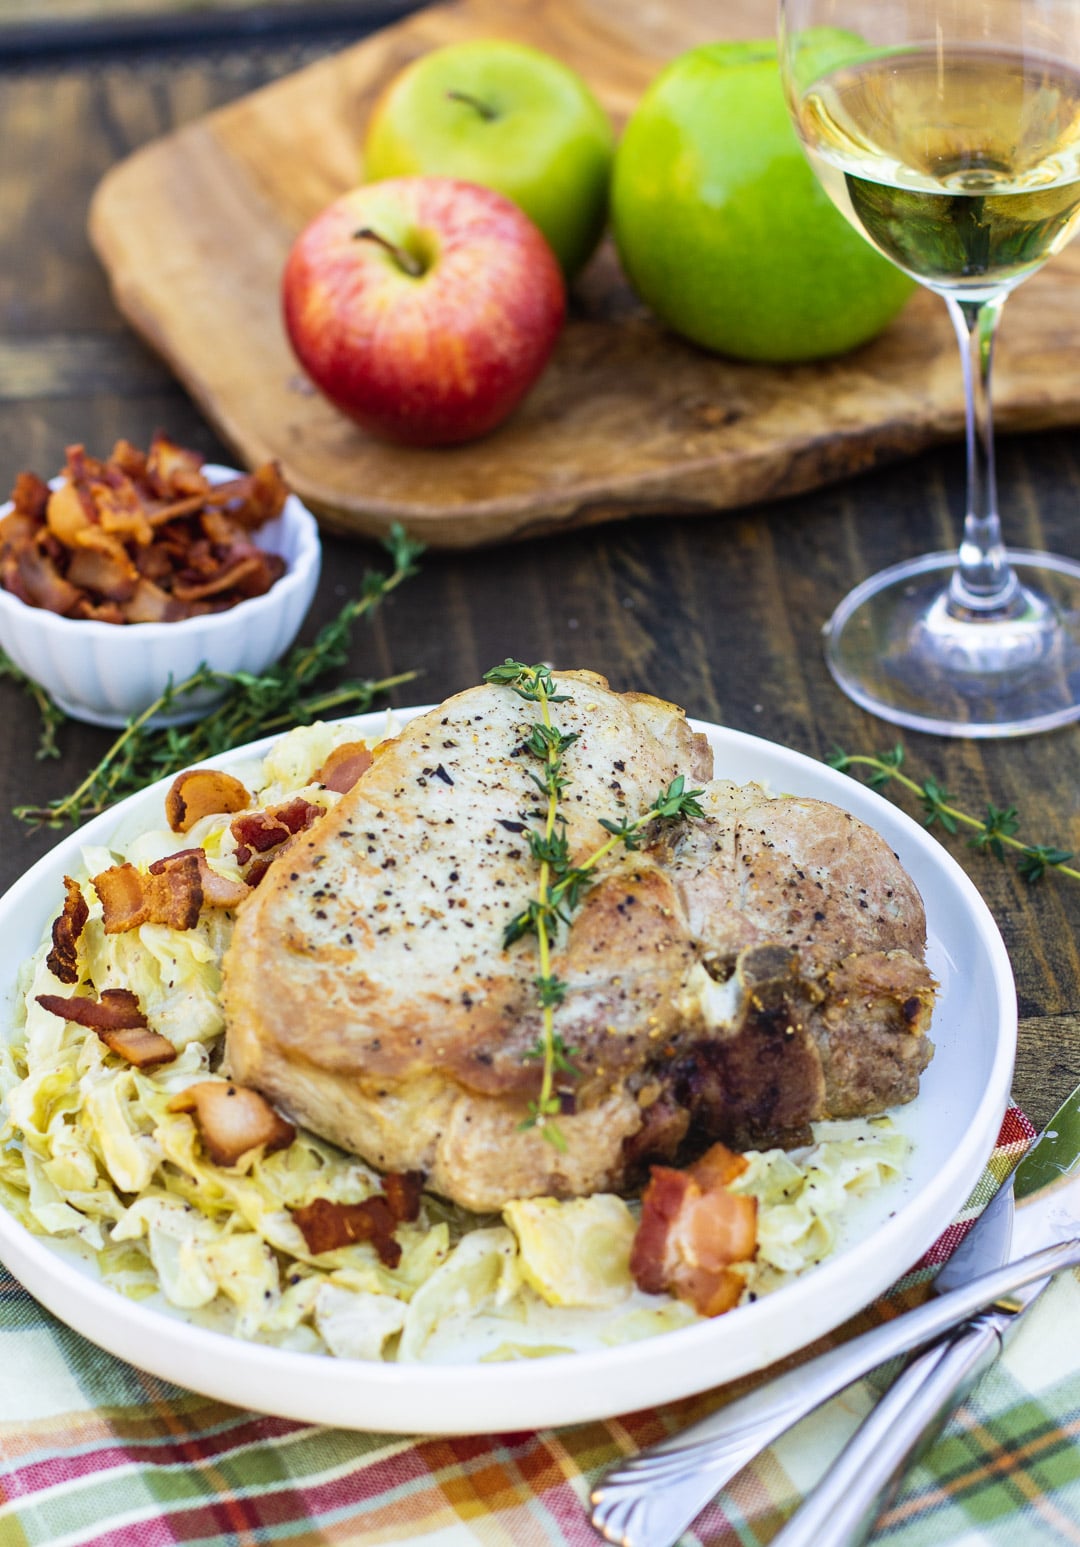 Pork Chop over cabbage on a plate with apples and glass of wine in background.